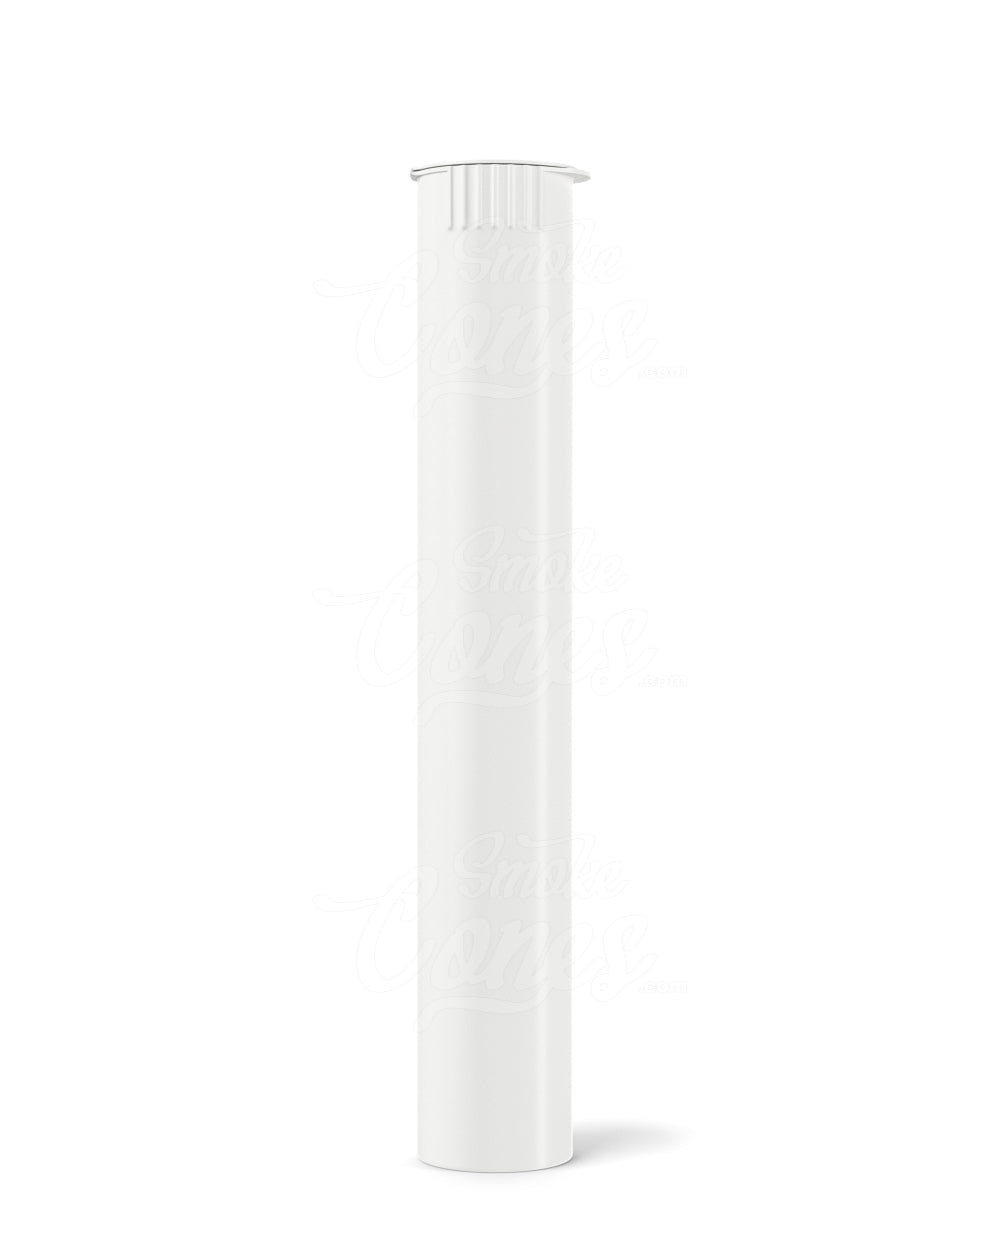 116mm Child Resistant King Size Biodegradable Pop Top White Plastic Pre-Roll Tubes 1000/Box - 2